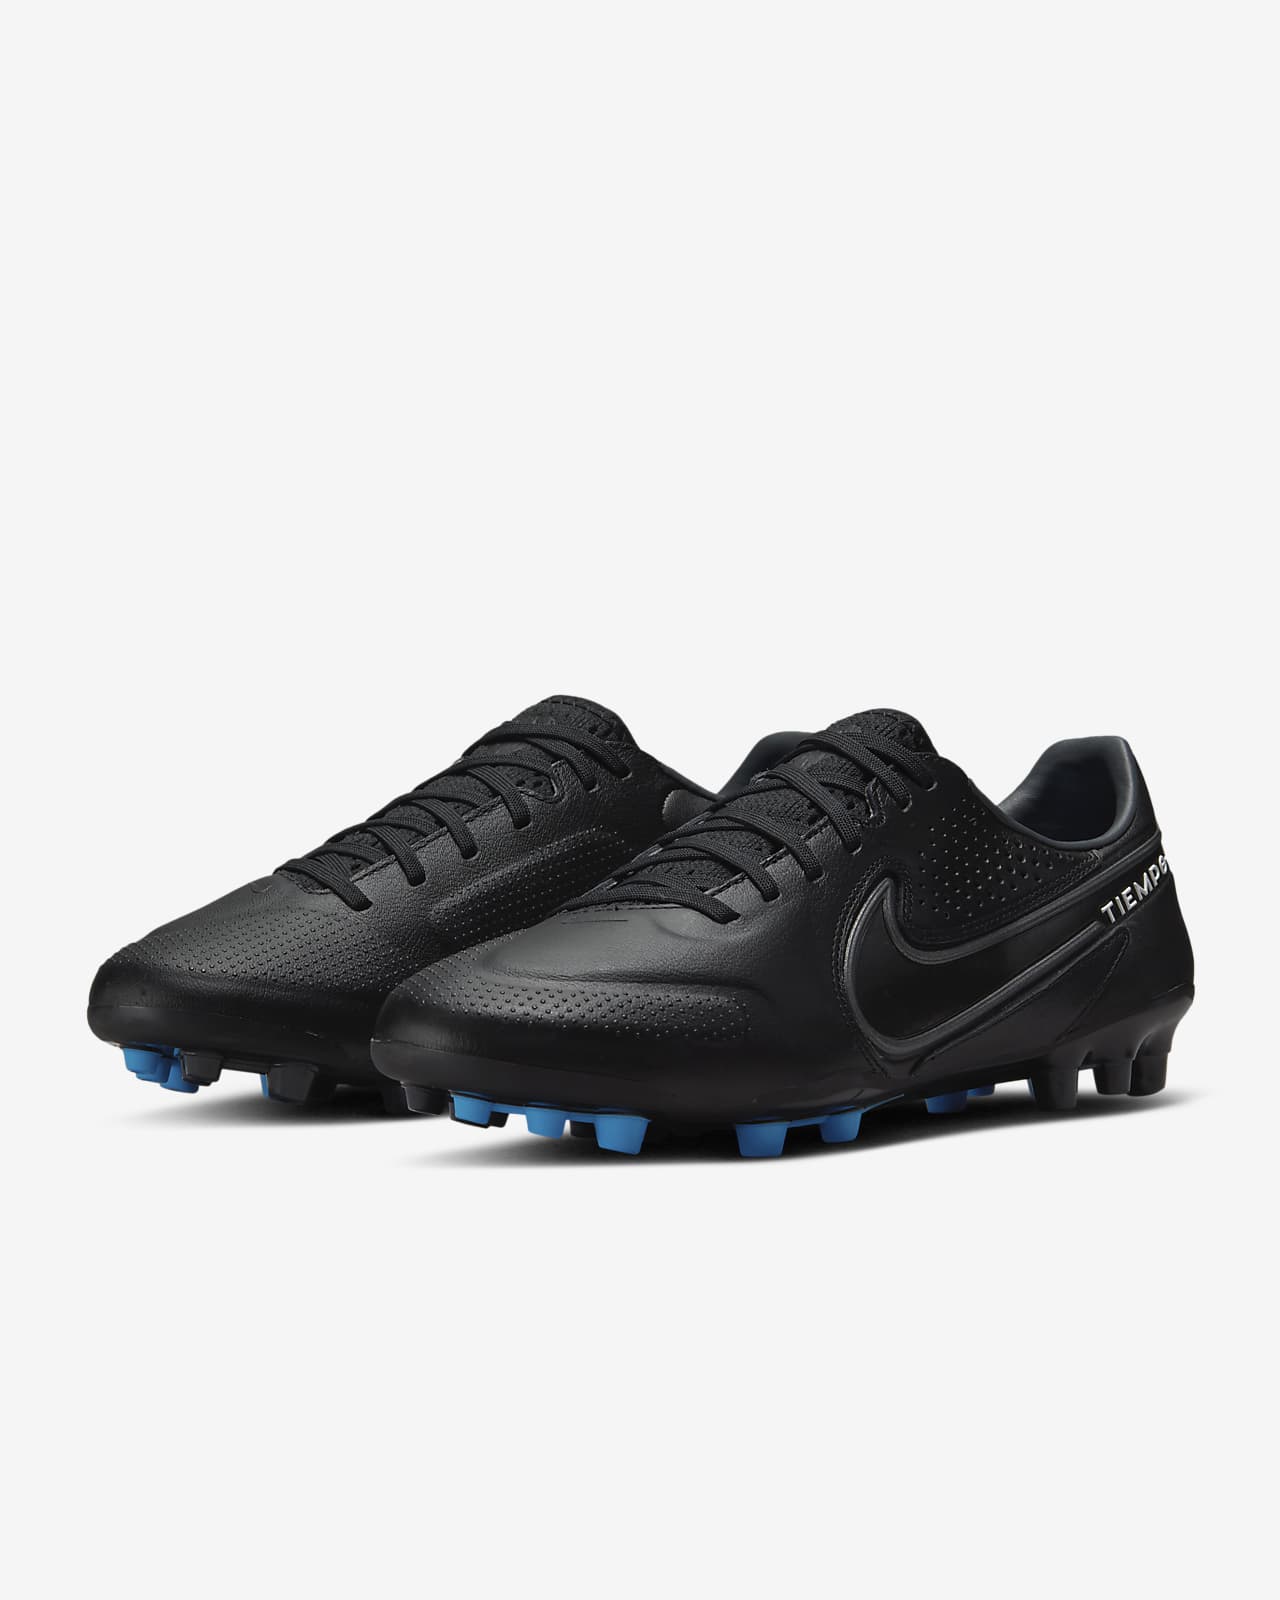 Nike Tiempo Legend Pro AG-Pro Artificial-Ground Football Boot ...